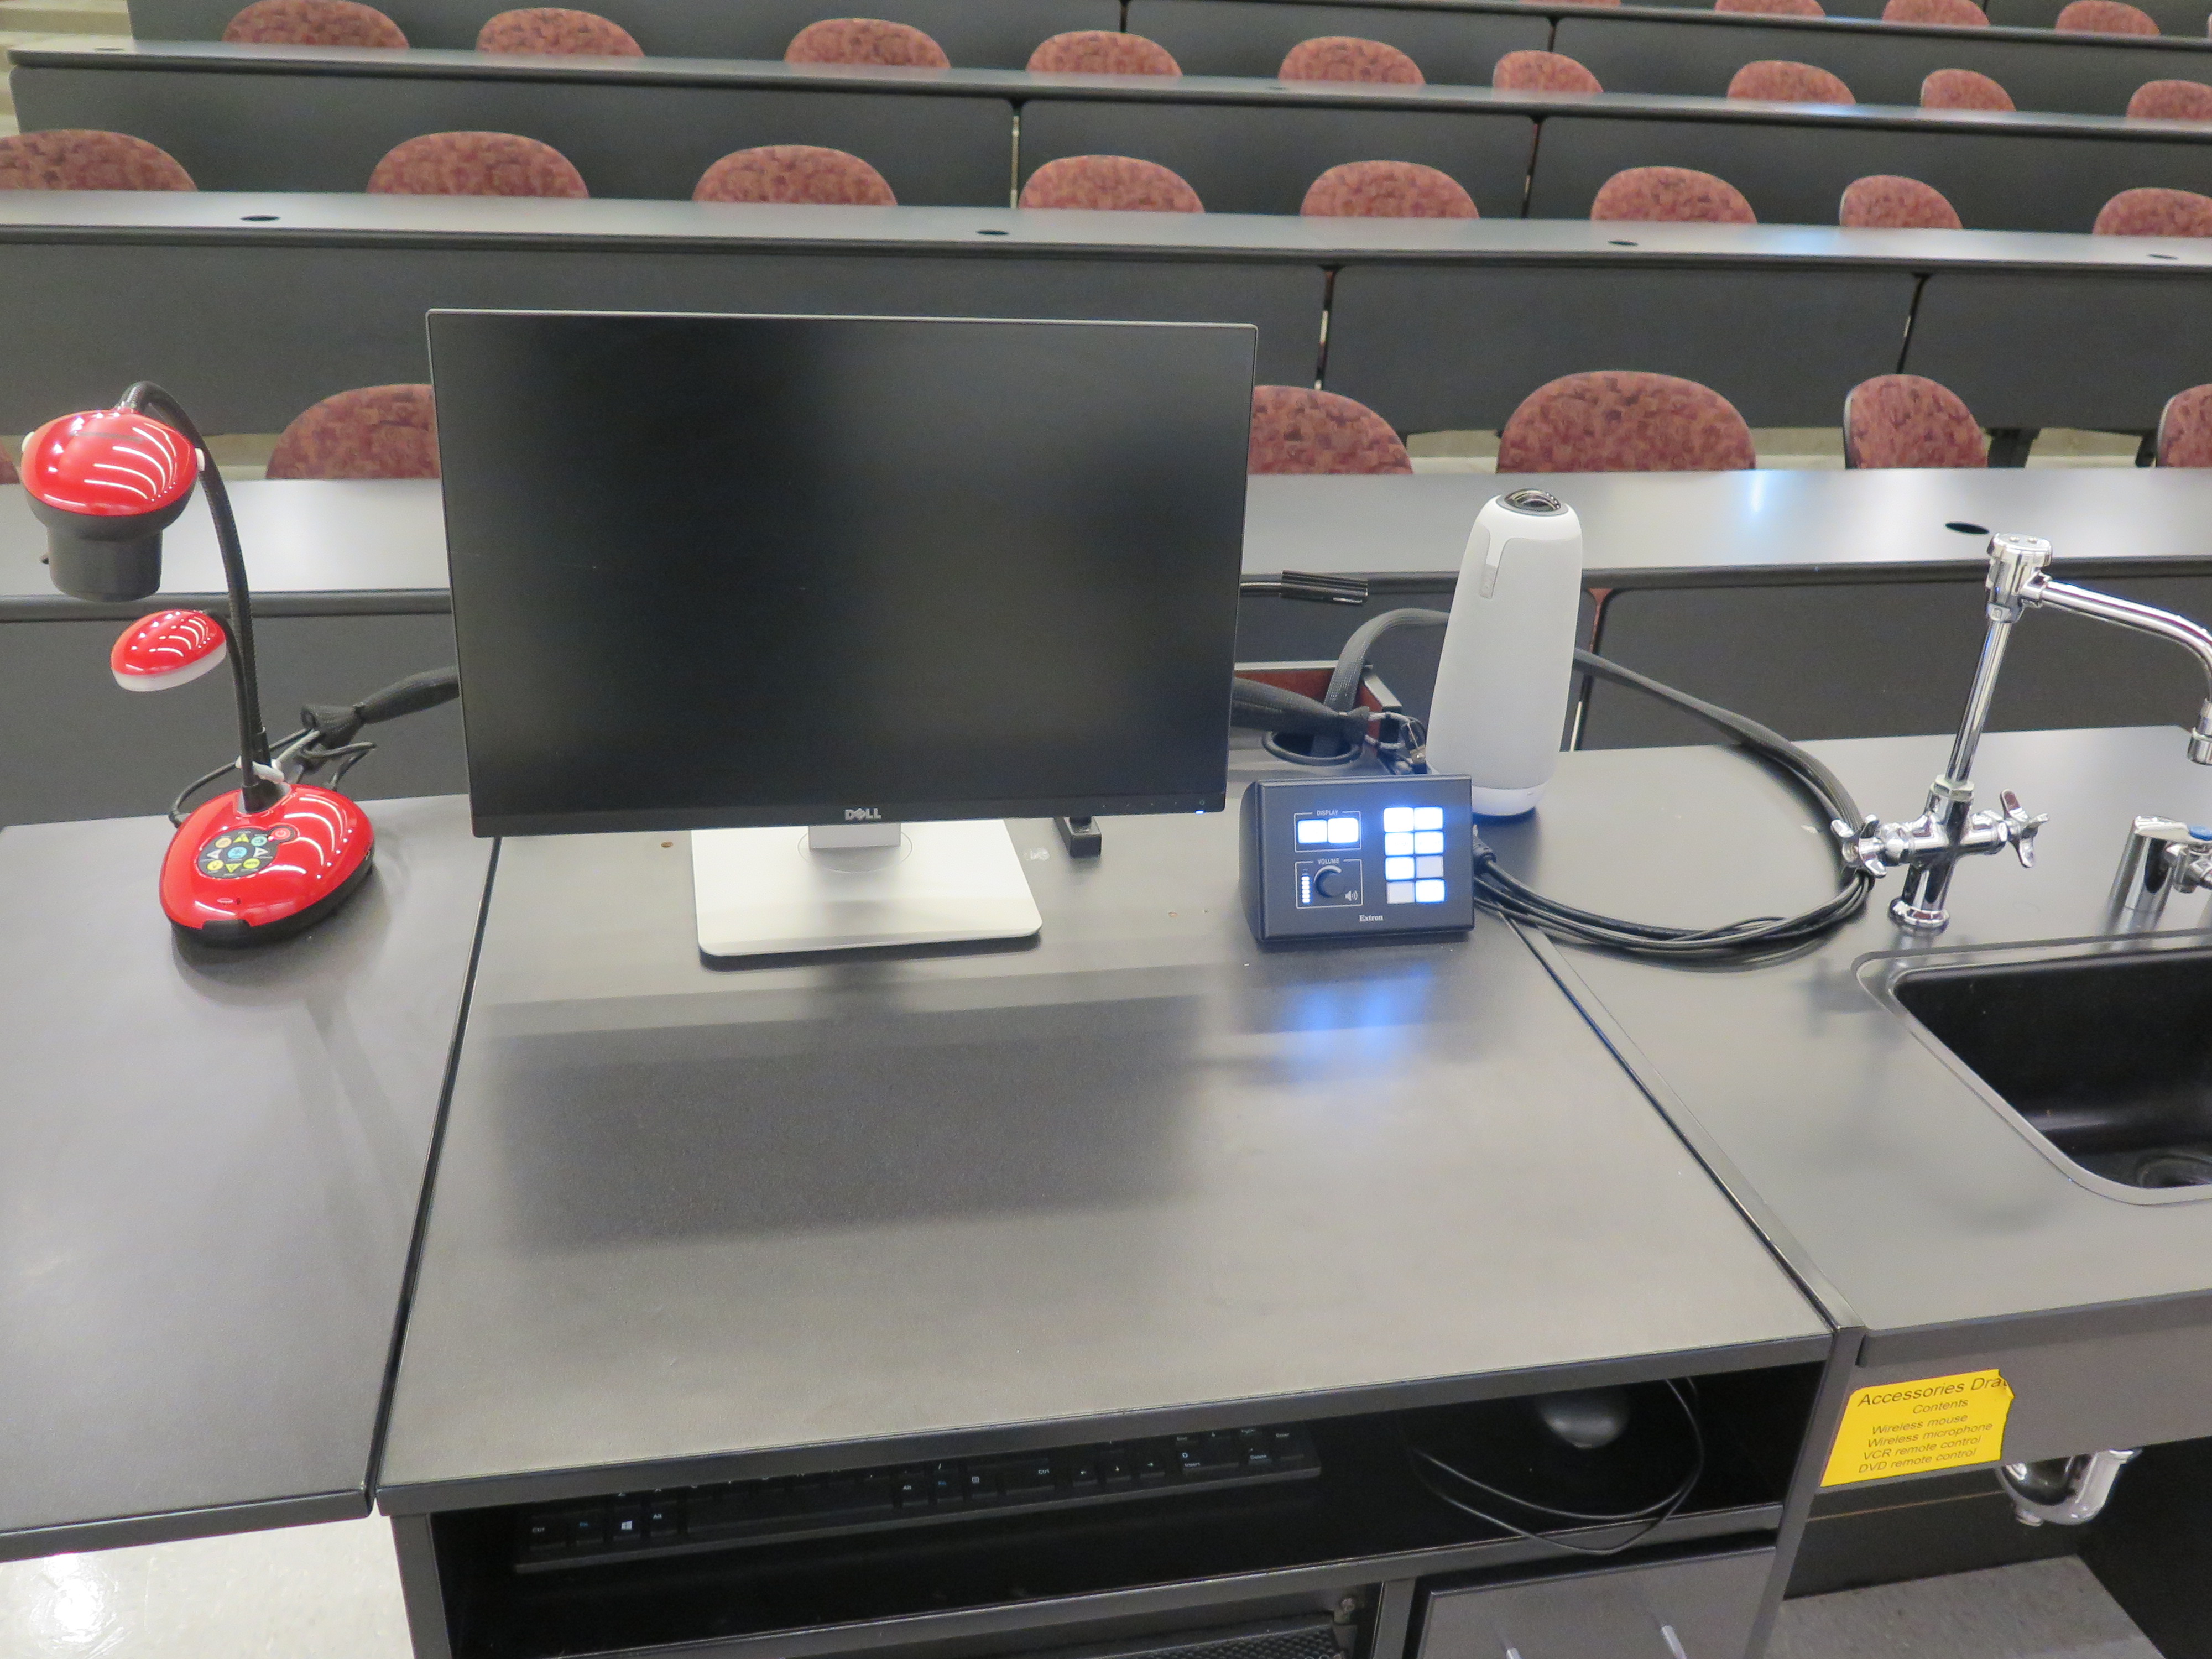 On top of podium is Owl Camera, Dell computer monitor, AV push button controller, and Lumens Ladybug document camera.